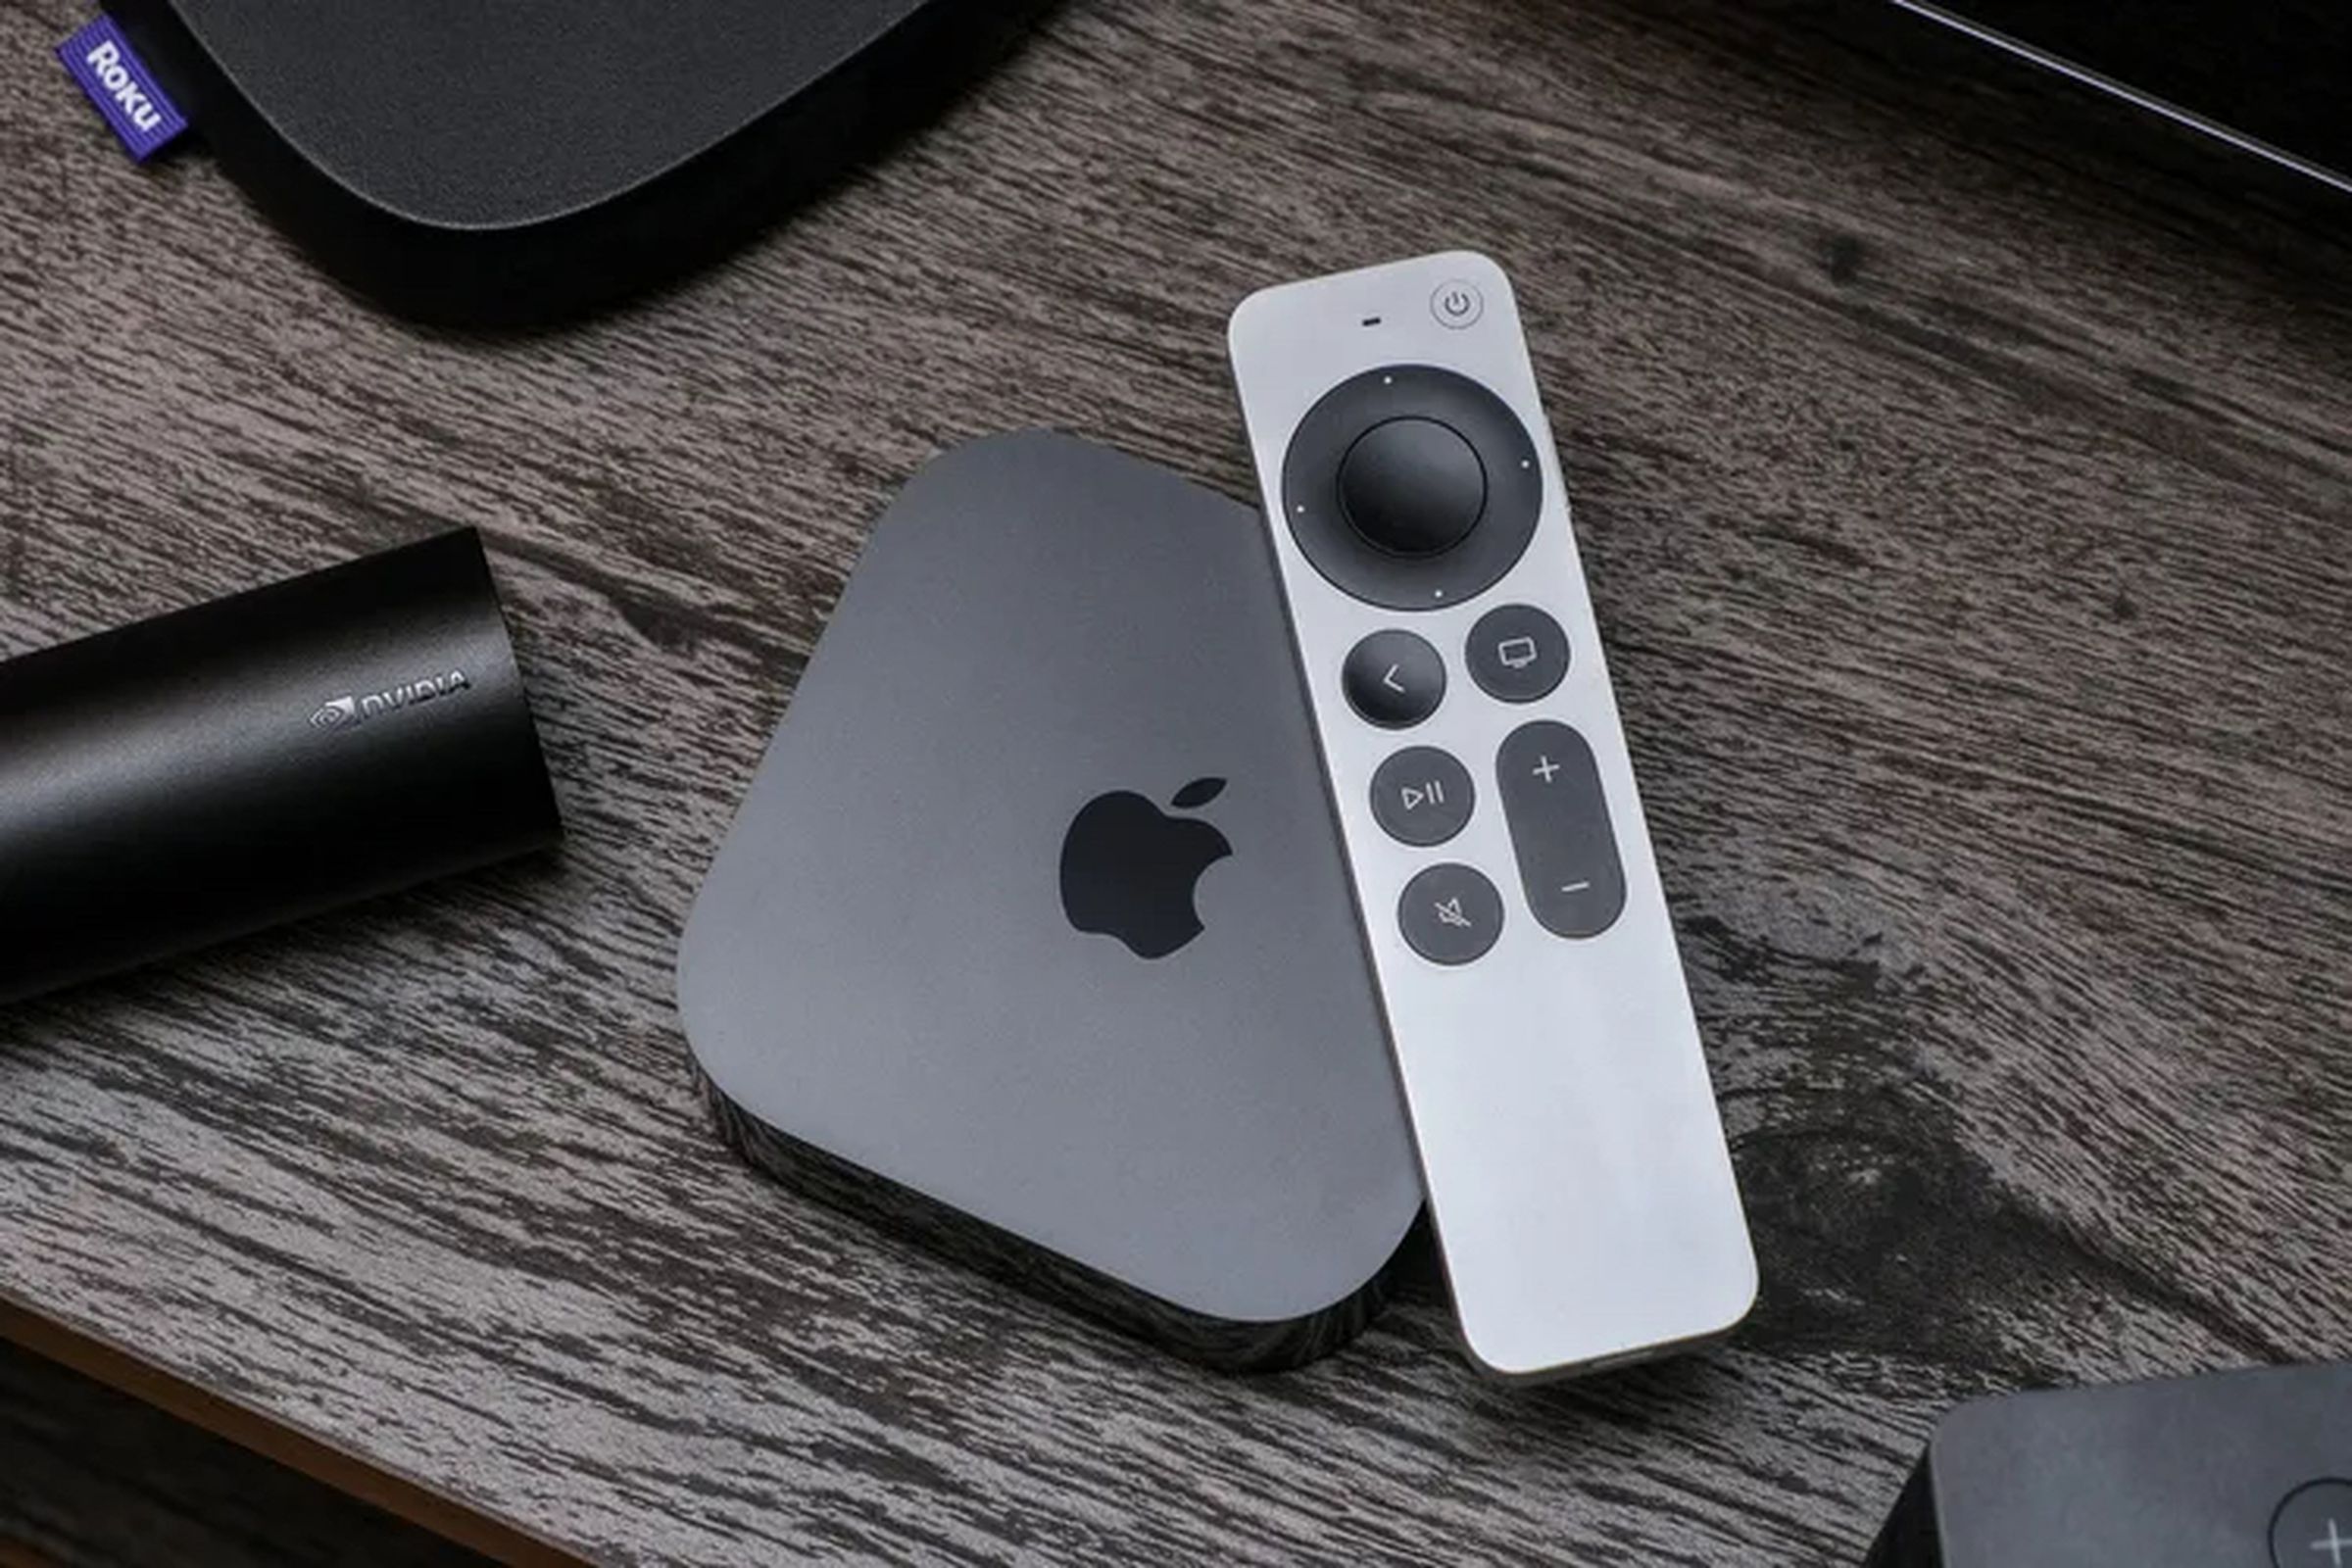 An image showing an Apple TV device and remote 